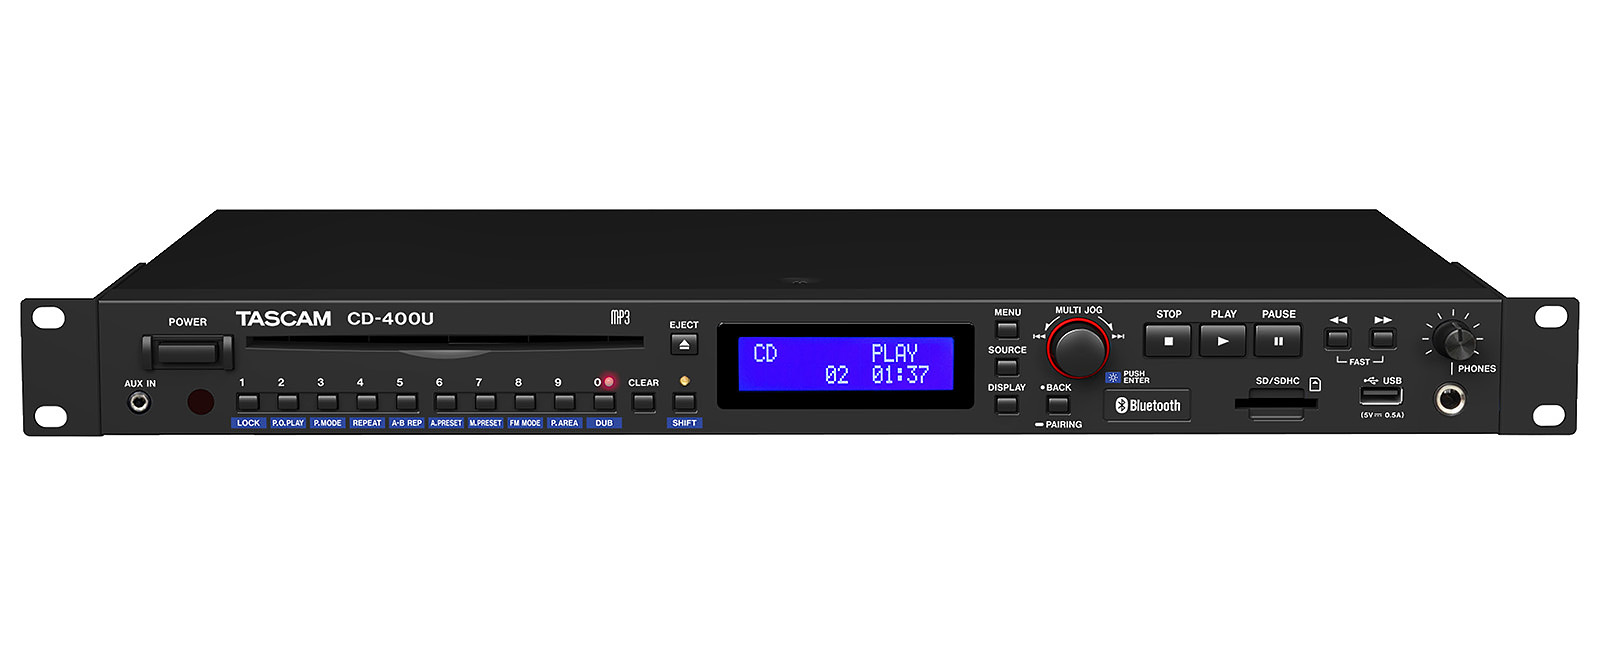 CD-400U - New Upgraded Version 1.42 of Firmware Released